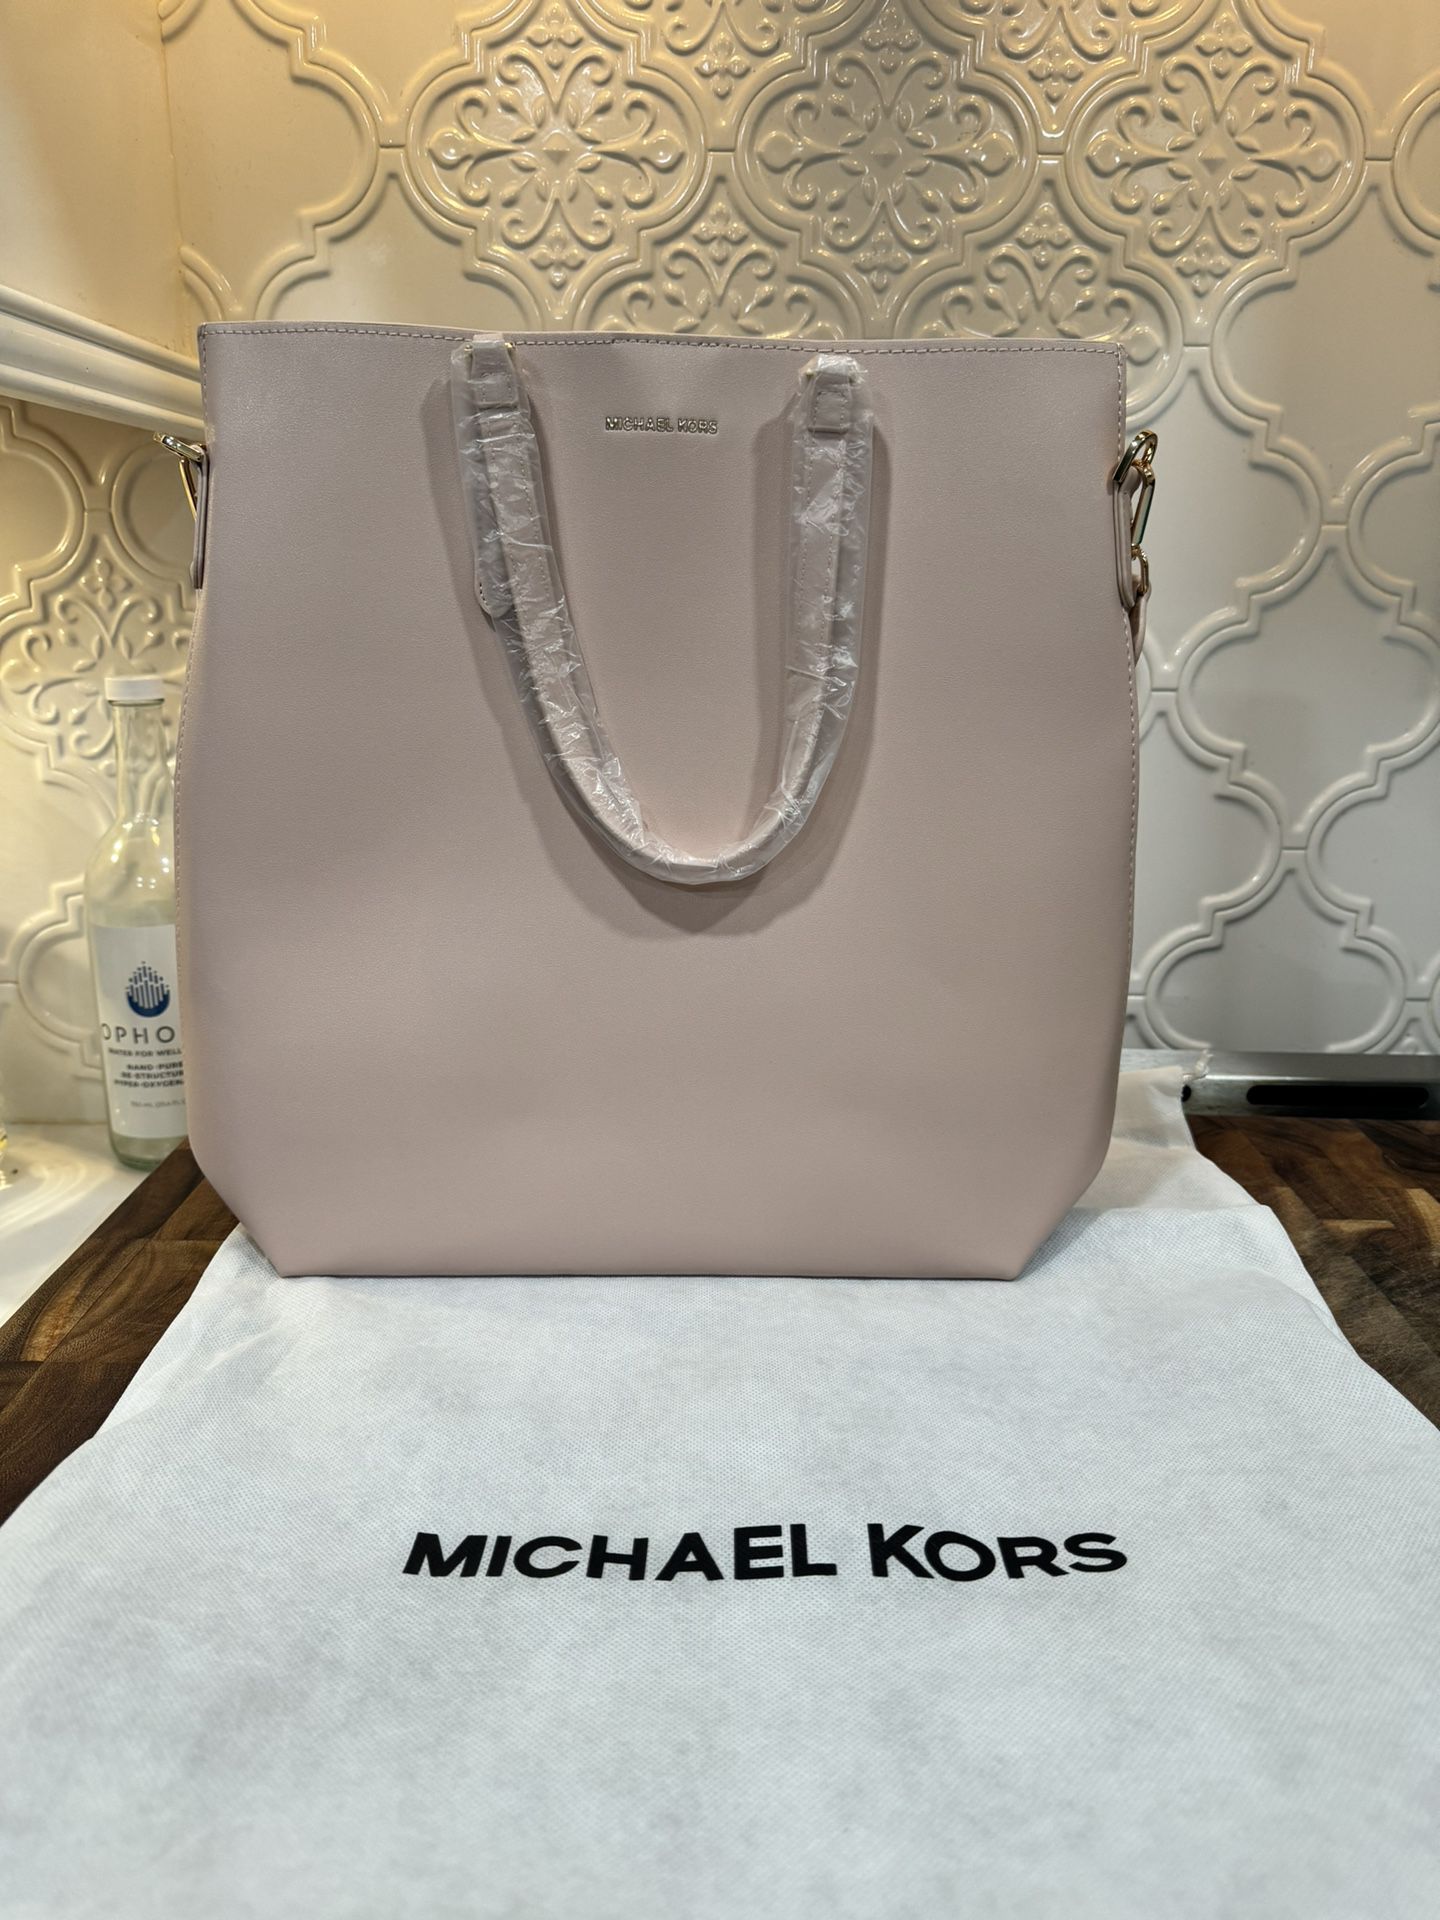 MICHAEL KORS Beauty tote bag -Limited edition